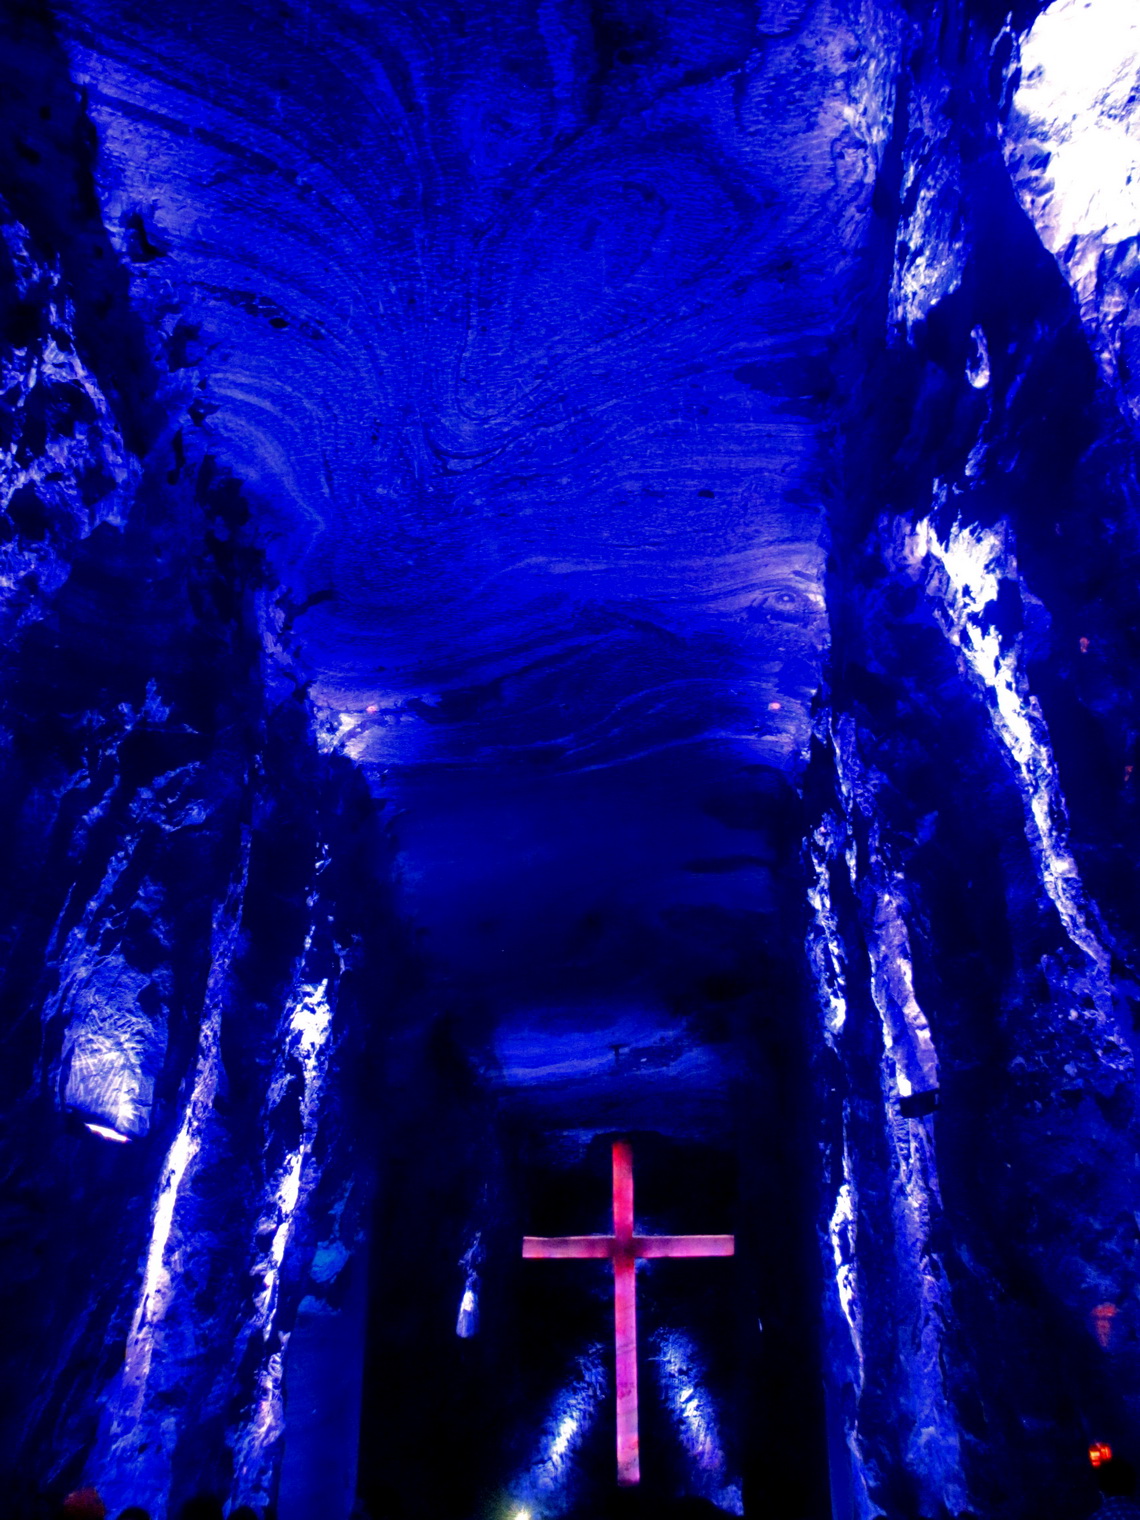 75 meters long salt cathedral with its huge cross, illuminated with different colors